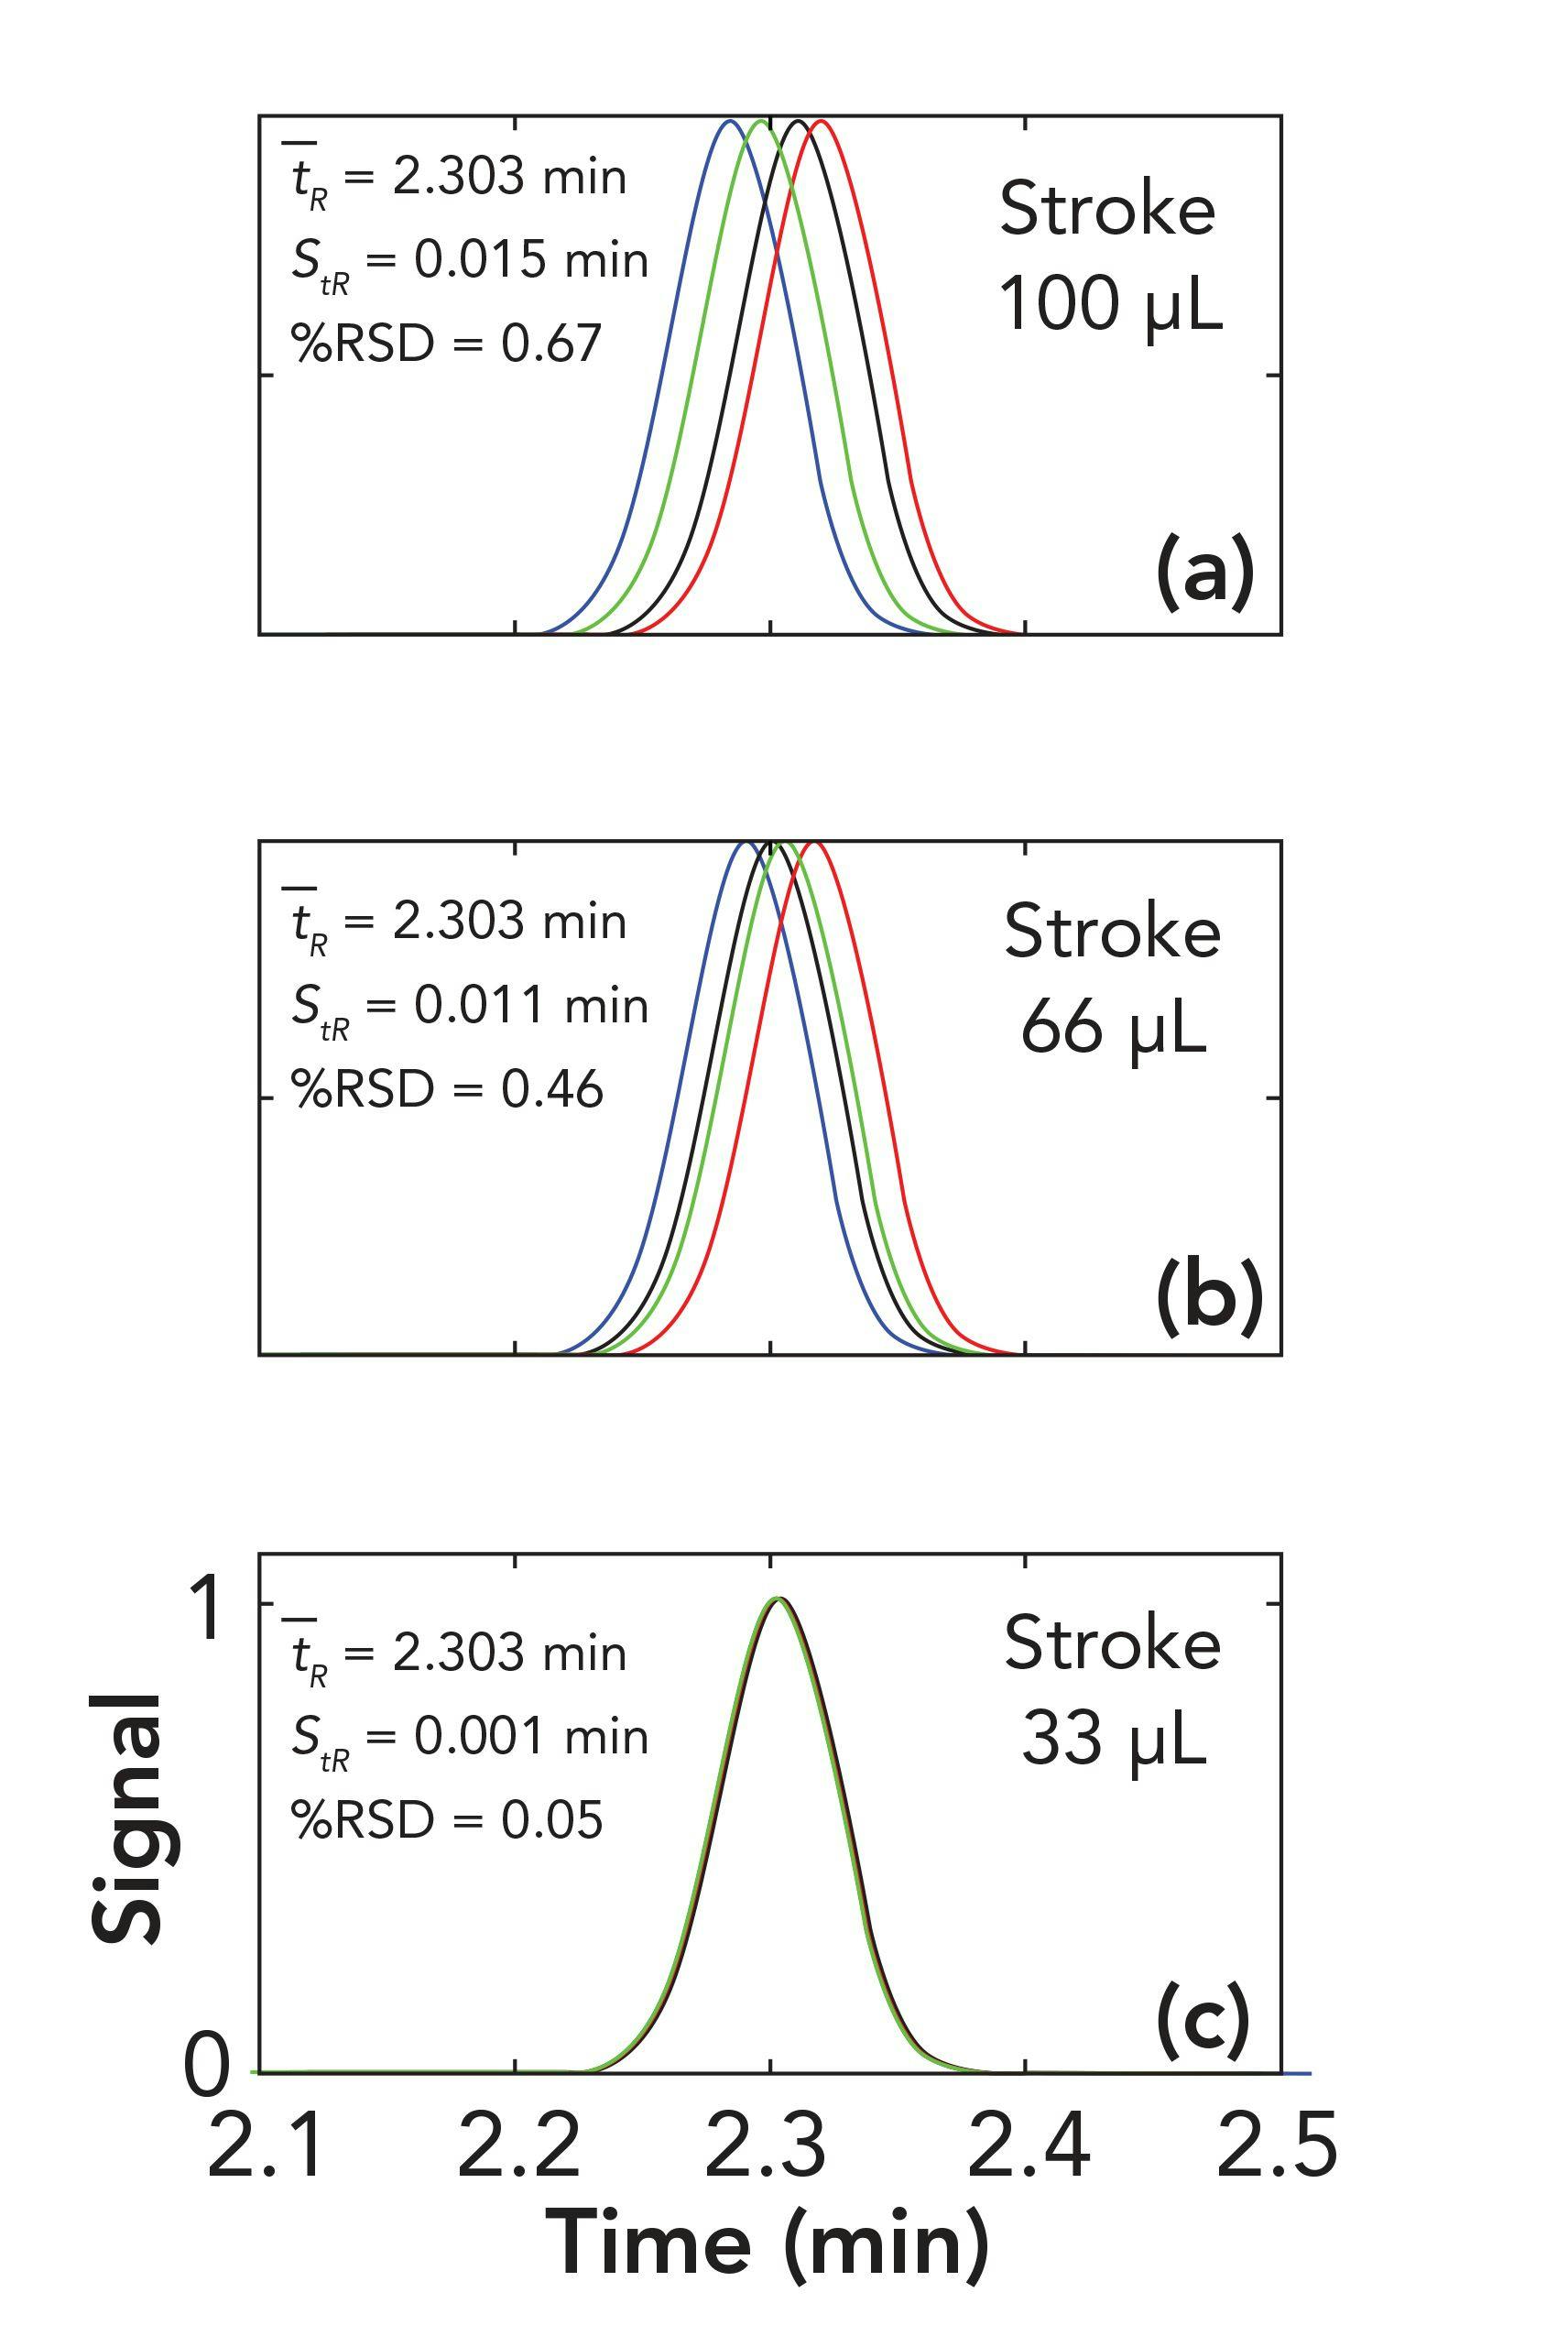 FIGURE 2: Effect of pump stroke volumes (a) 100 μL, (b) 66 μL, or (c) 33 μL on retention precision in isocratic separations. Conditions are the same as in Figure 1, except that the composition wave amplitude is 2% acetonitrile. The chromatograms in each overlay resulted from waves phase shifted by 0 (blue), π/2 (black), π (red), or 3π/2 (green). Axis labels for each subfigure are given in the bottom subfigure.